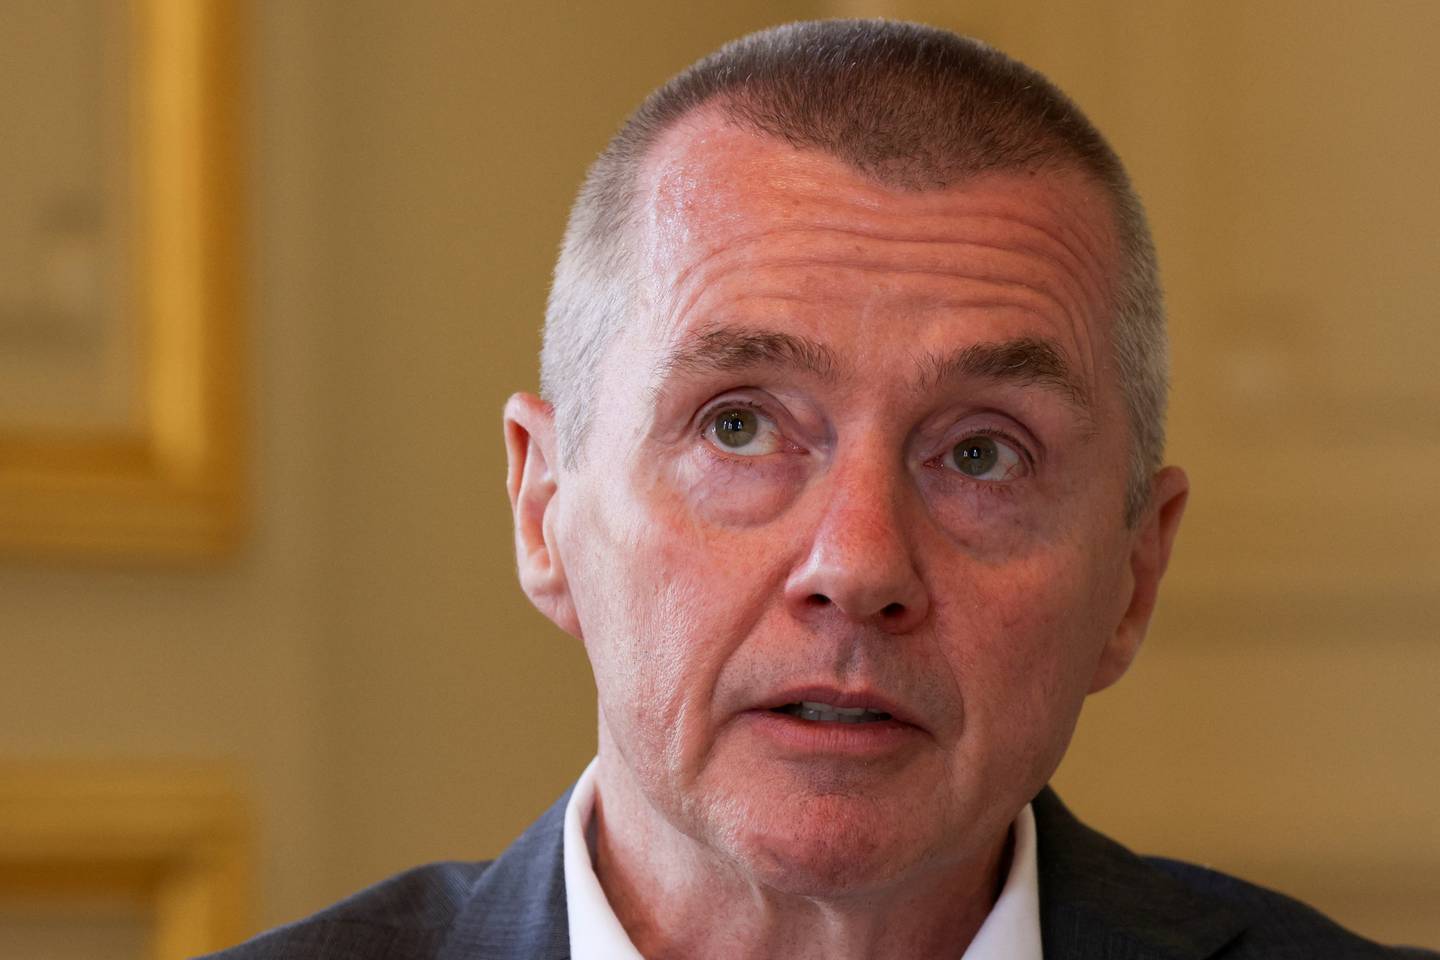 Iata boss Willie Walsh said airlines were not to blame for the problems at Heathrow. Reuters 